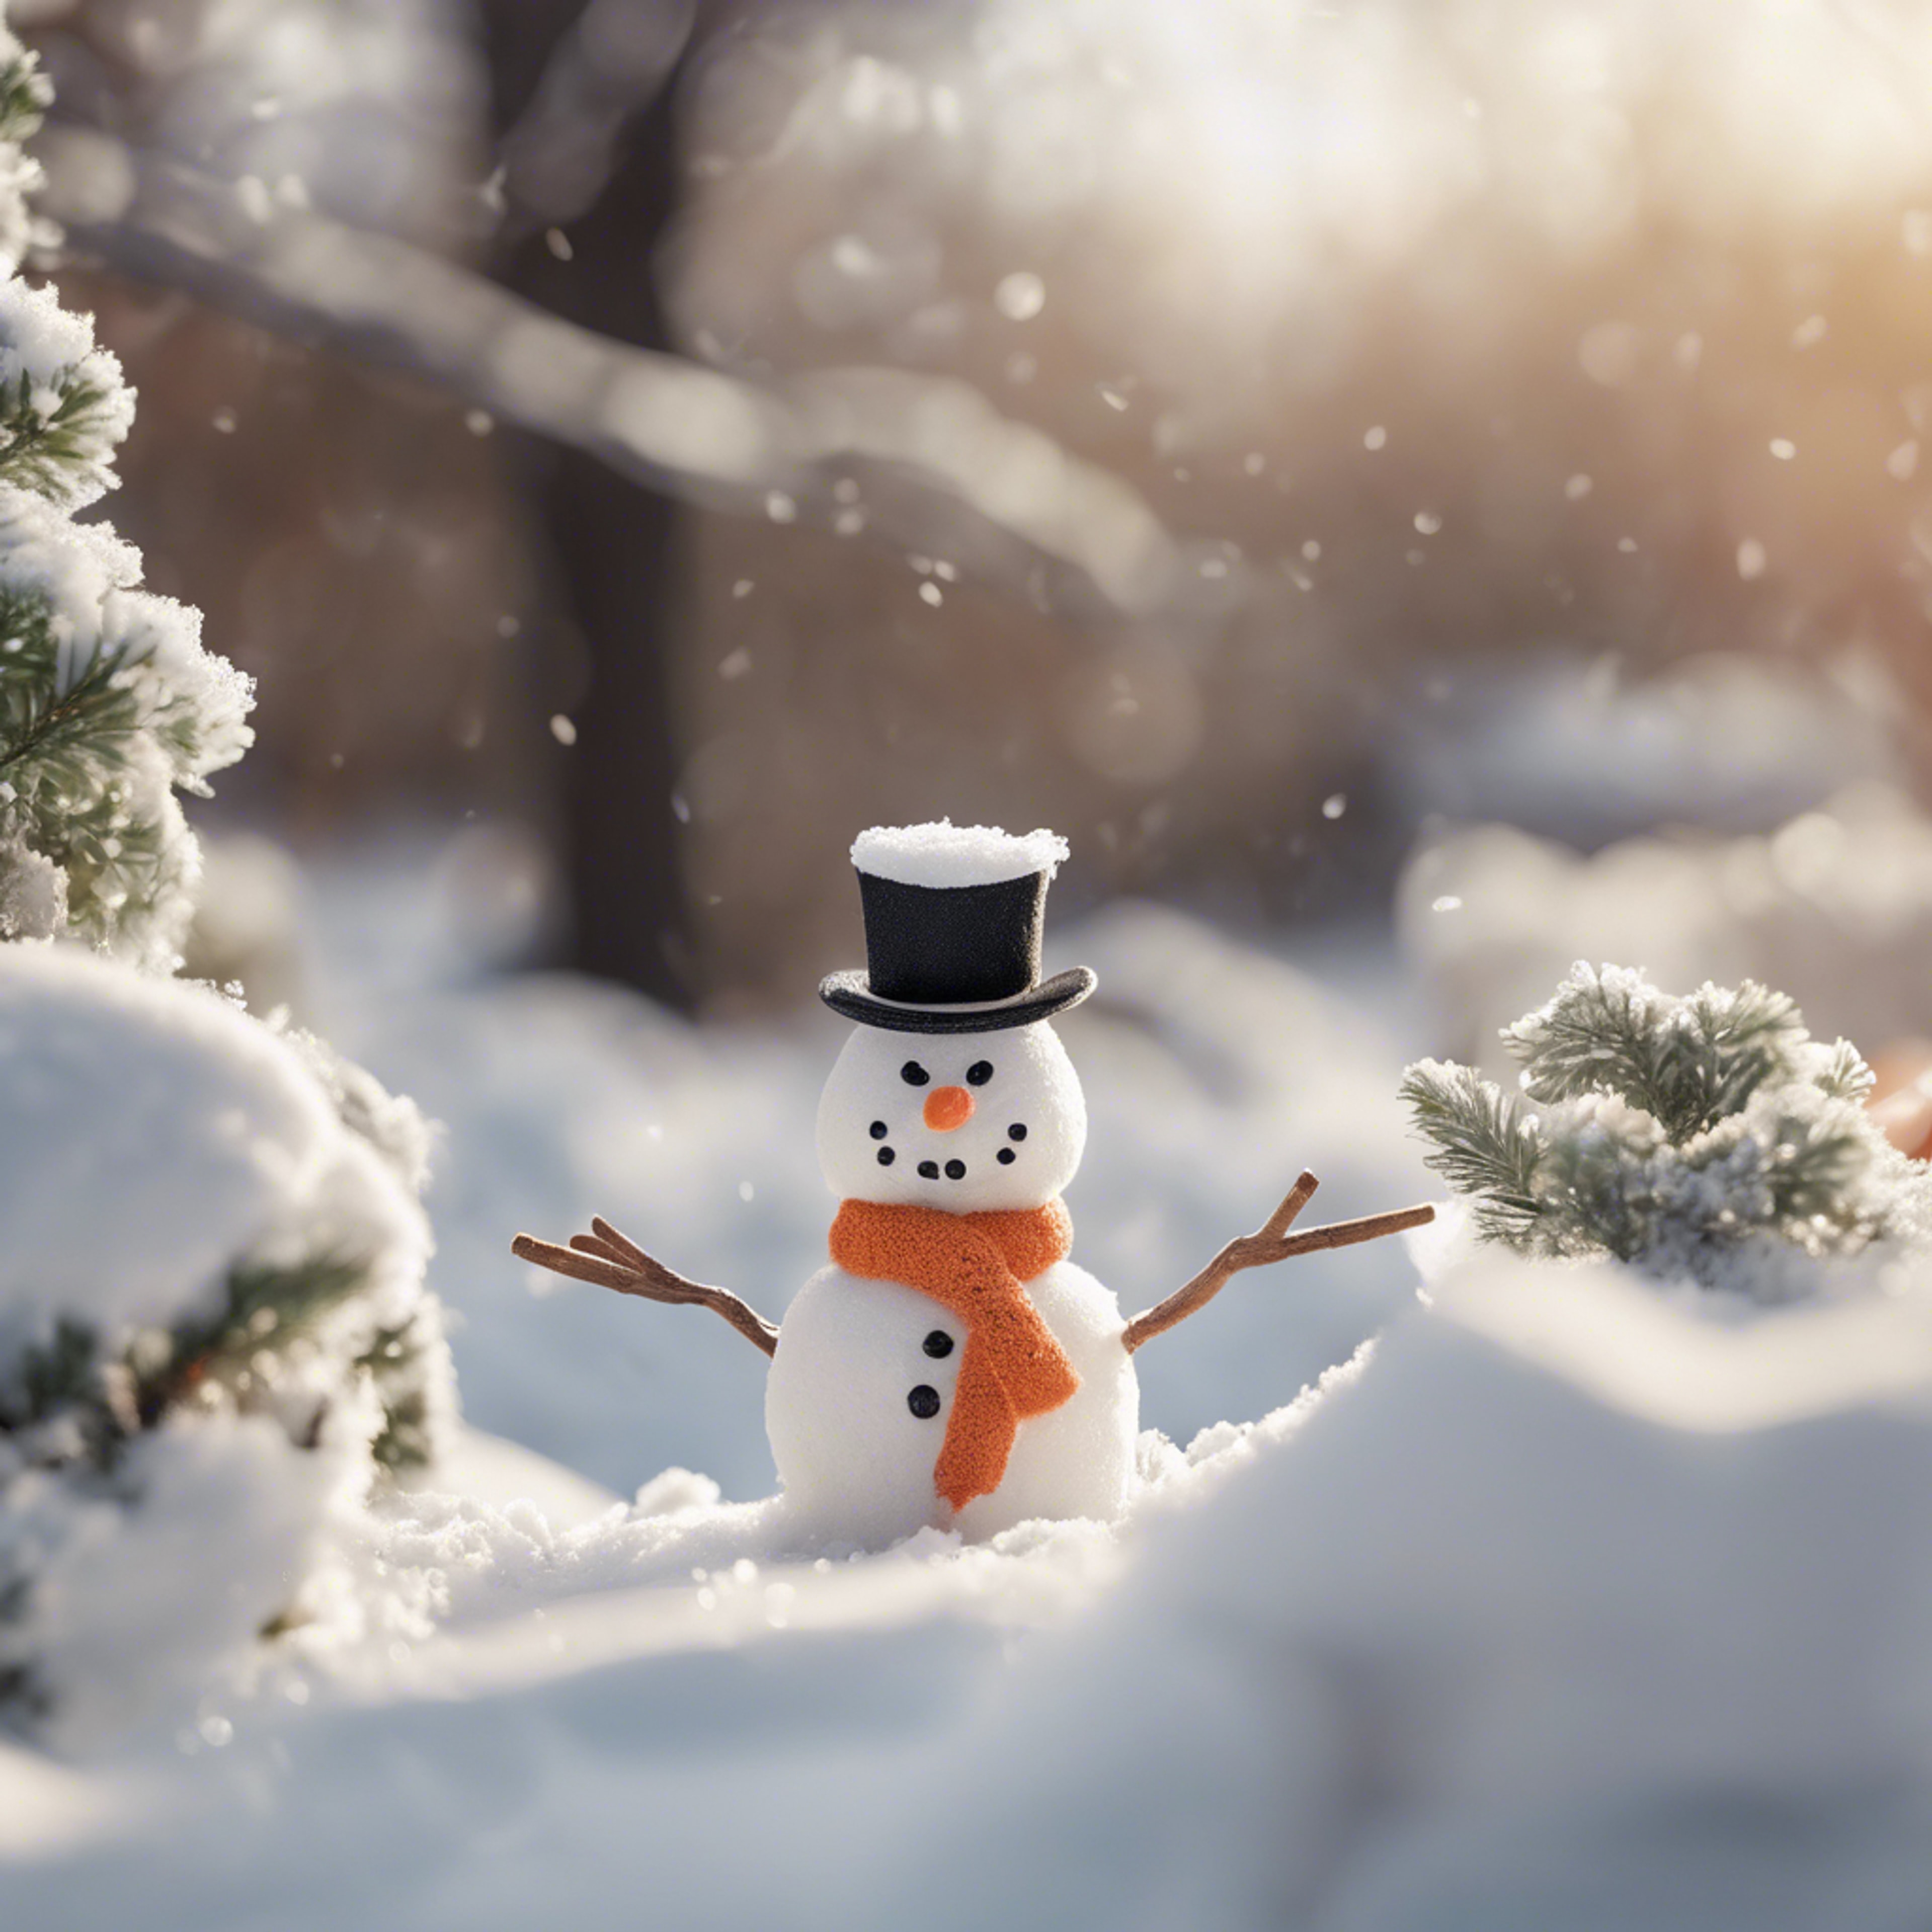 A winter scene featuring a beige kawaii snowman with a top hat and carrot nose. Wallpaper[43b64e4c71ac4b7f8356]